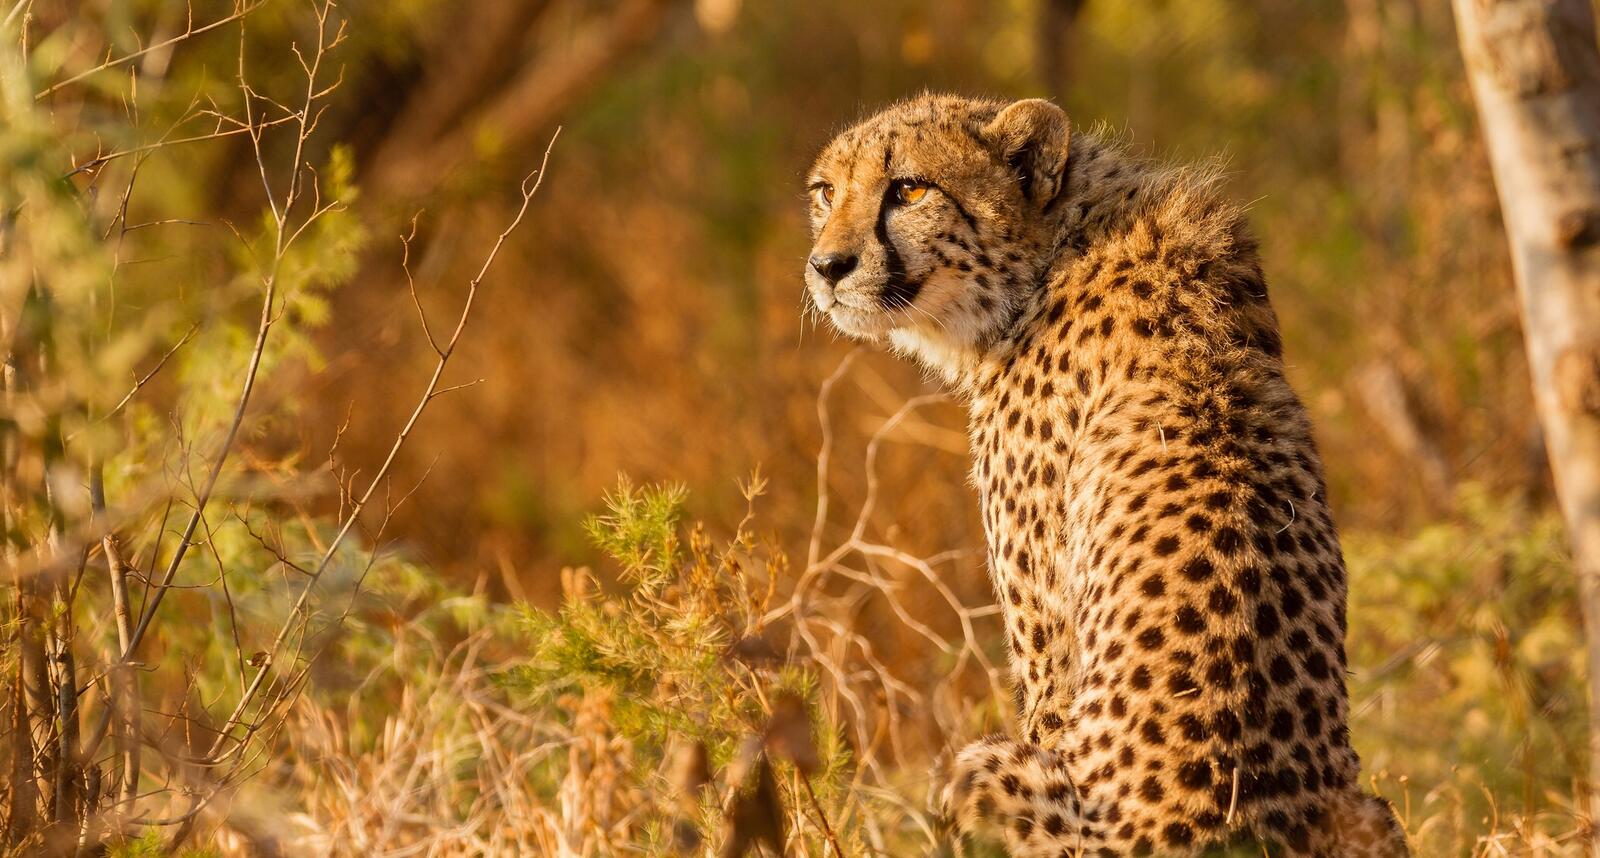 Free photo A cheetah sitting in the grass looking around